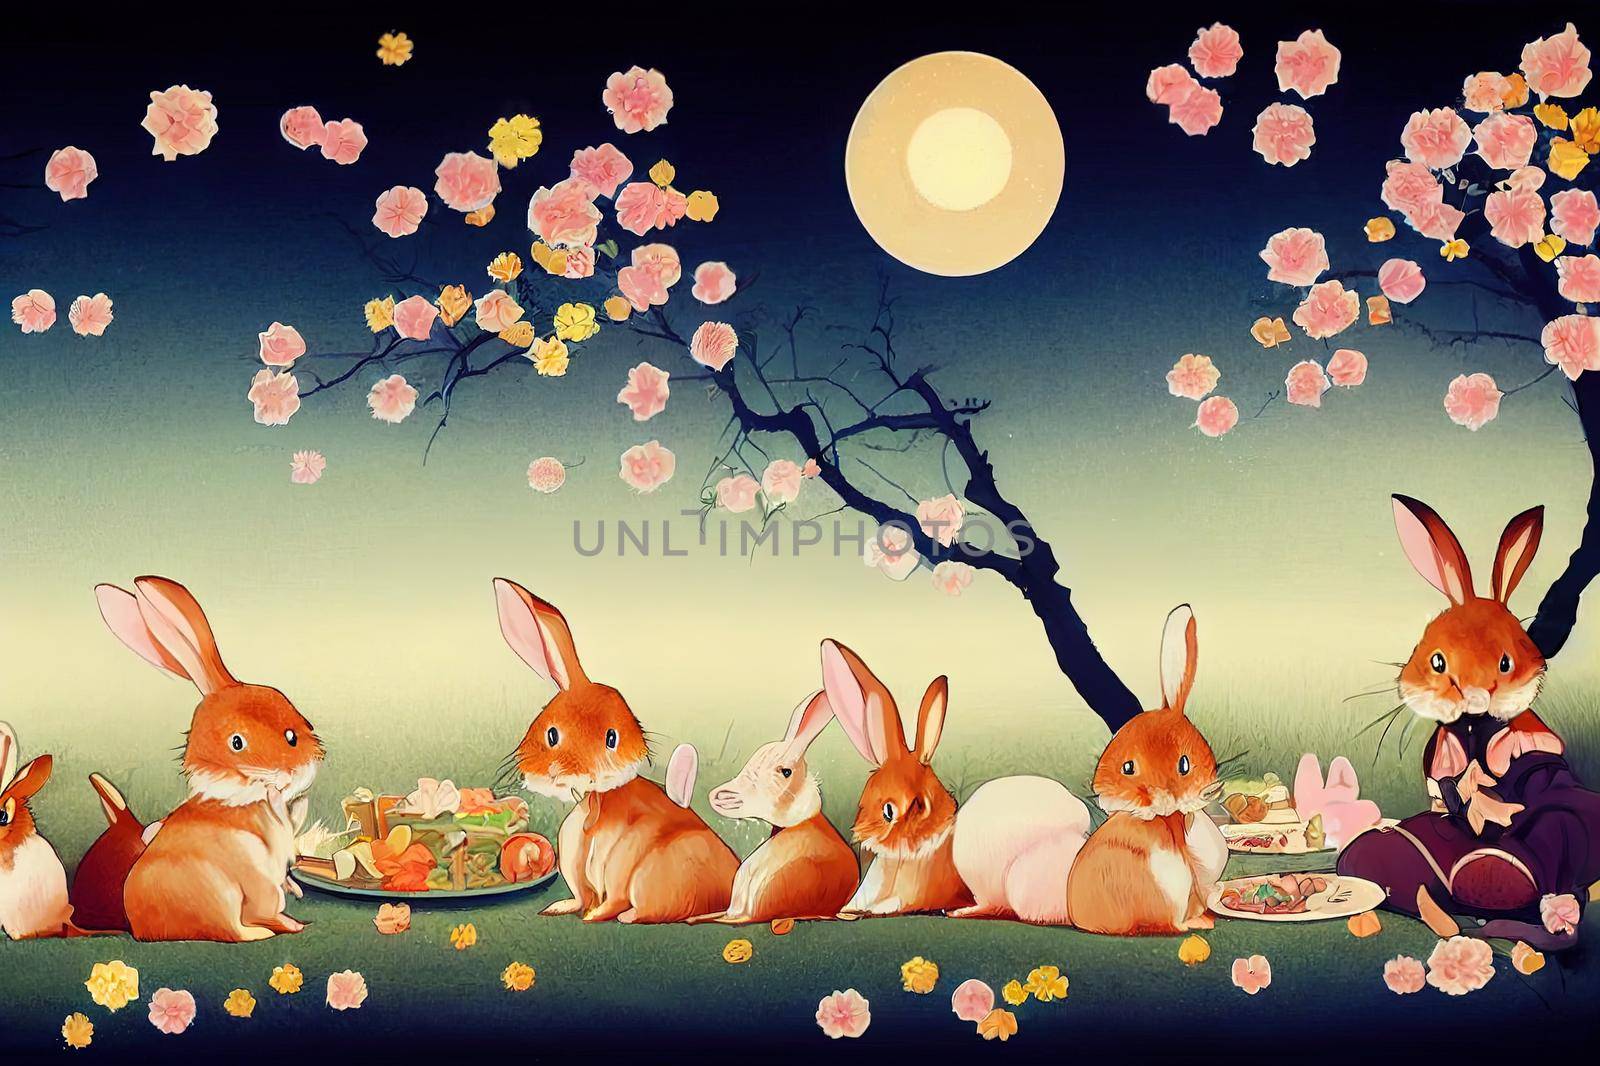 Cute rabbits picnicking under the romantic moonlight with falling osmanthus petals Translation MidAutumn Festival 15th August